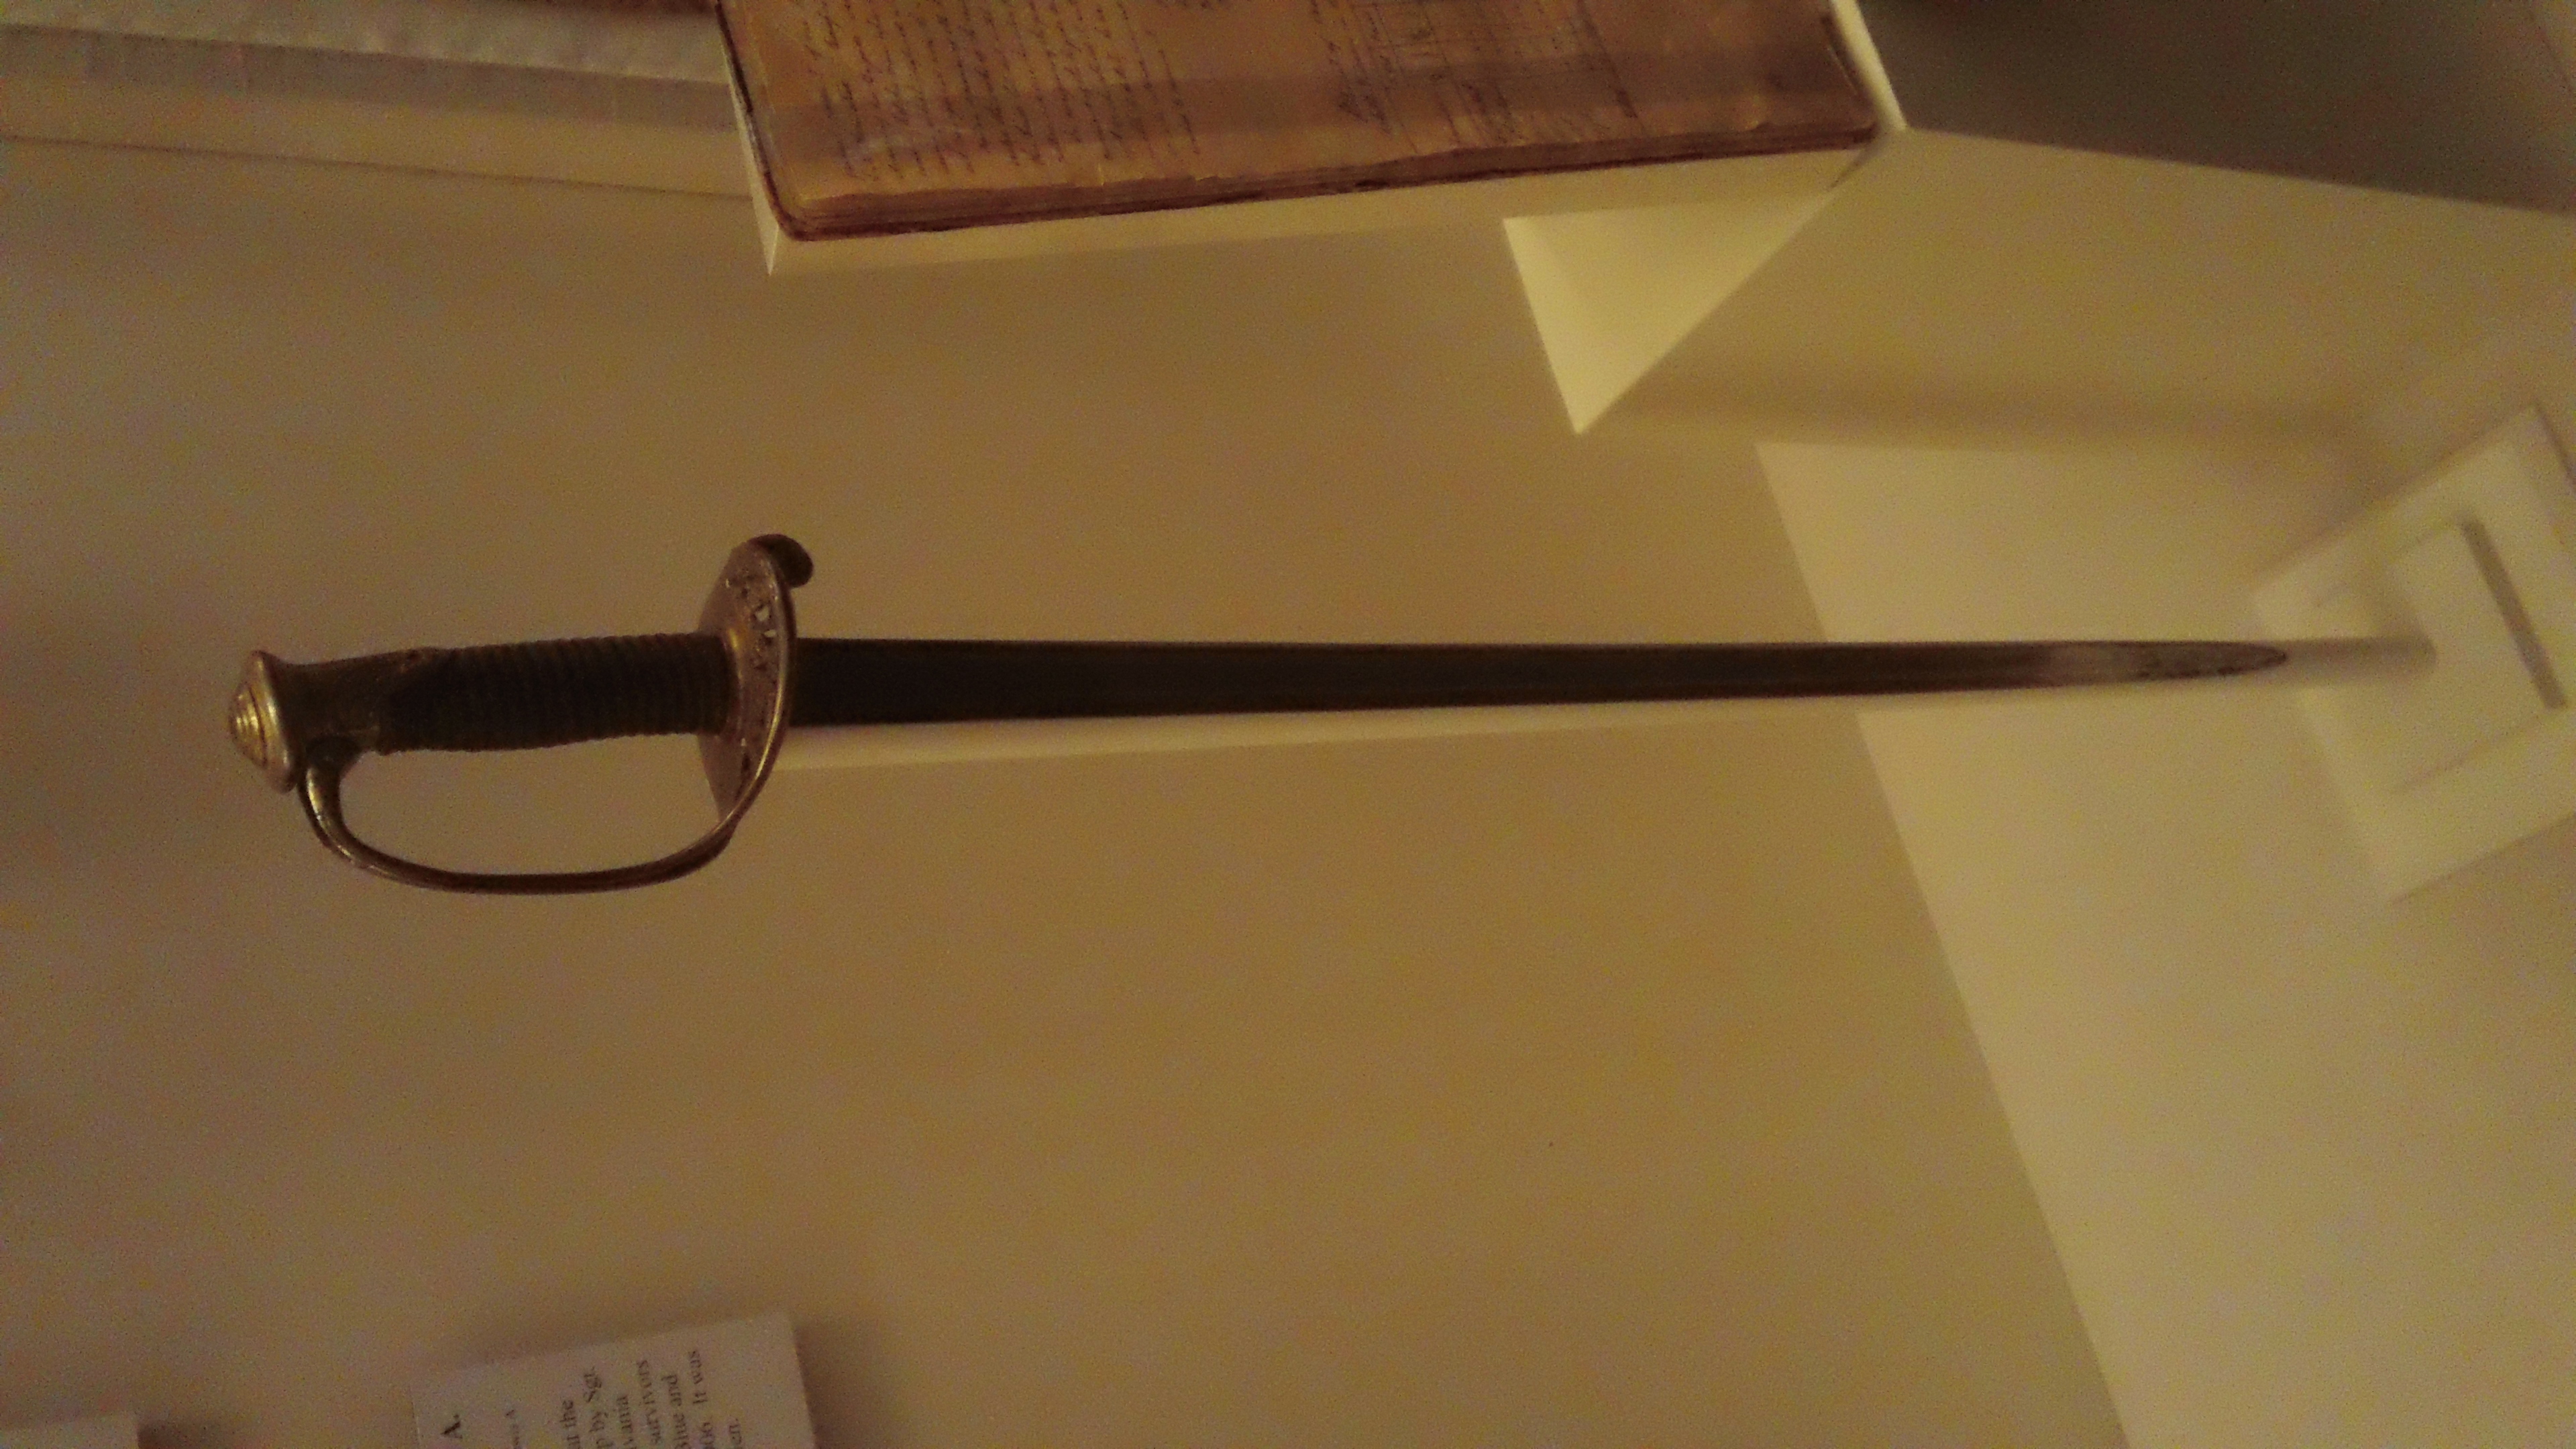  The sword of Armistead. To see it with my own eyes was a special moment.&nbsp; 